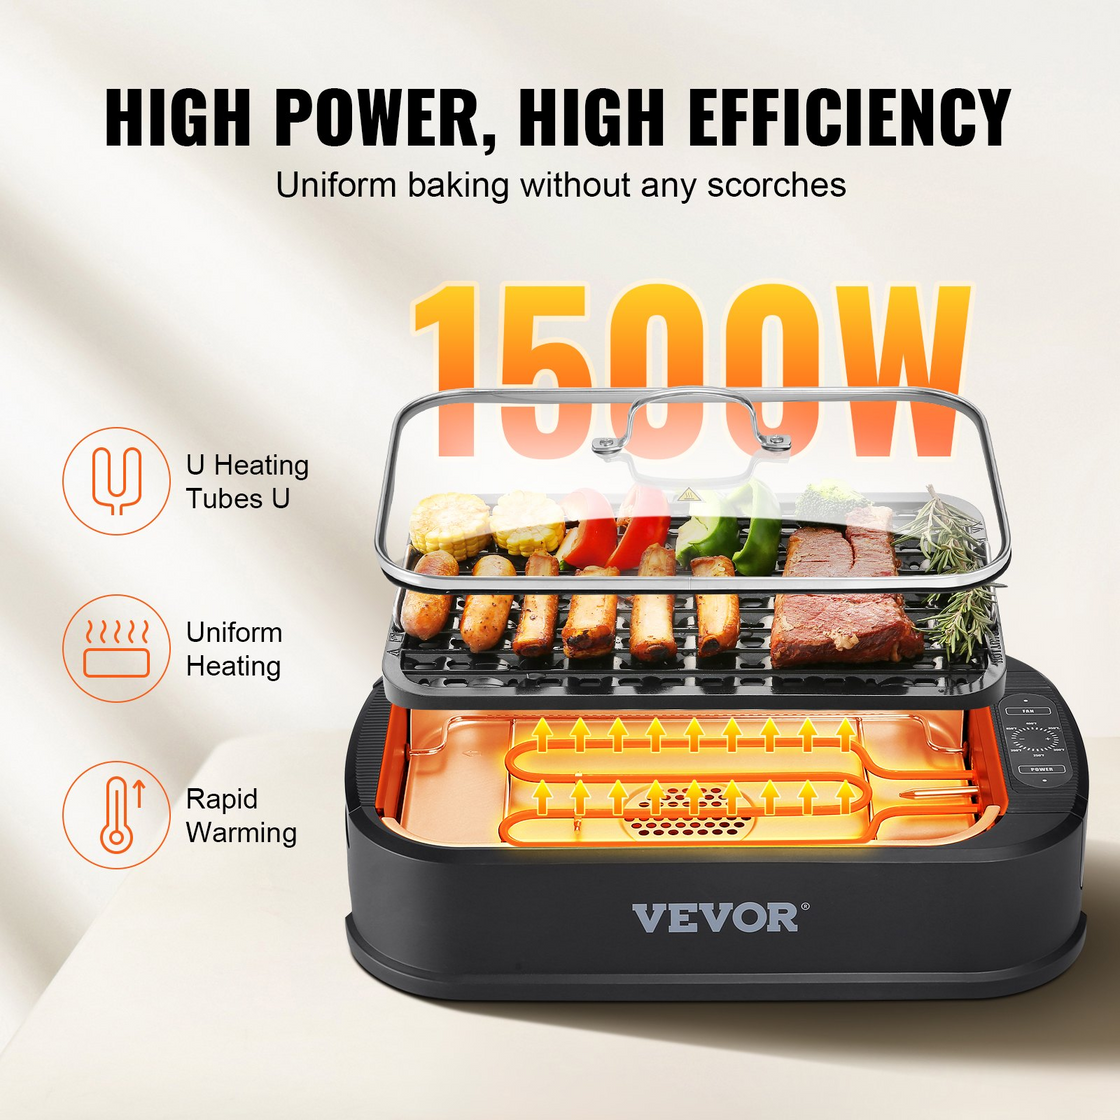 VEVOR Smokeless Indoor Grill, 110 sq.in 1500W Electric BBQ Grill with Non-Stick Surface | Adjustable Temperature | Turbo Smoke Extractor | Detachable Dishwasher-safe Smokeless Grill for Party Camping